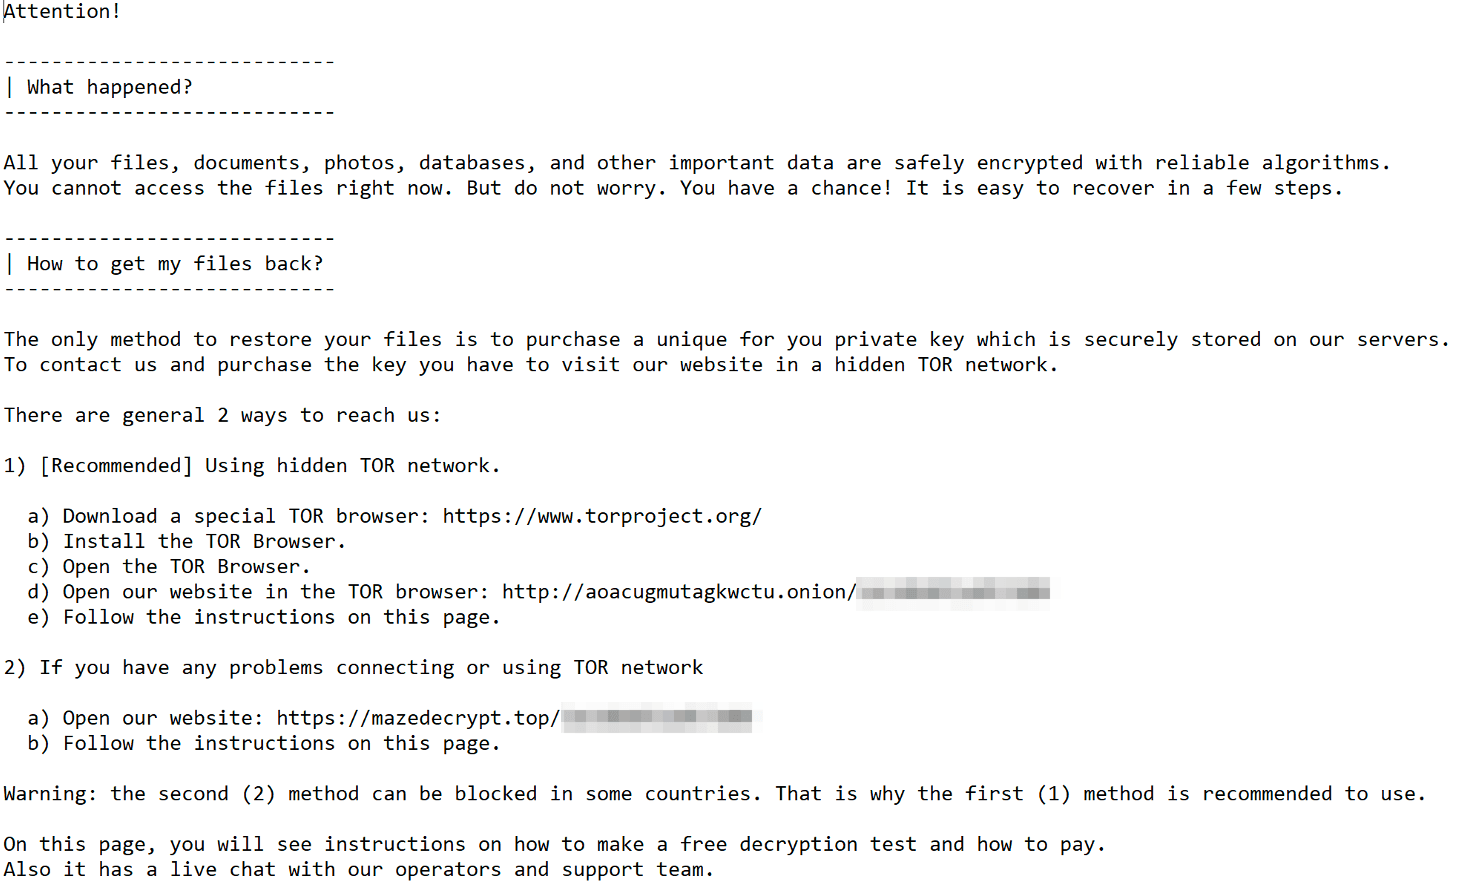 An example of a Ransomware extortion note